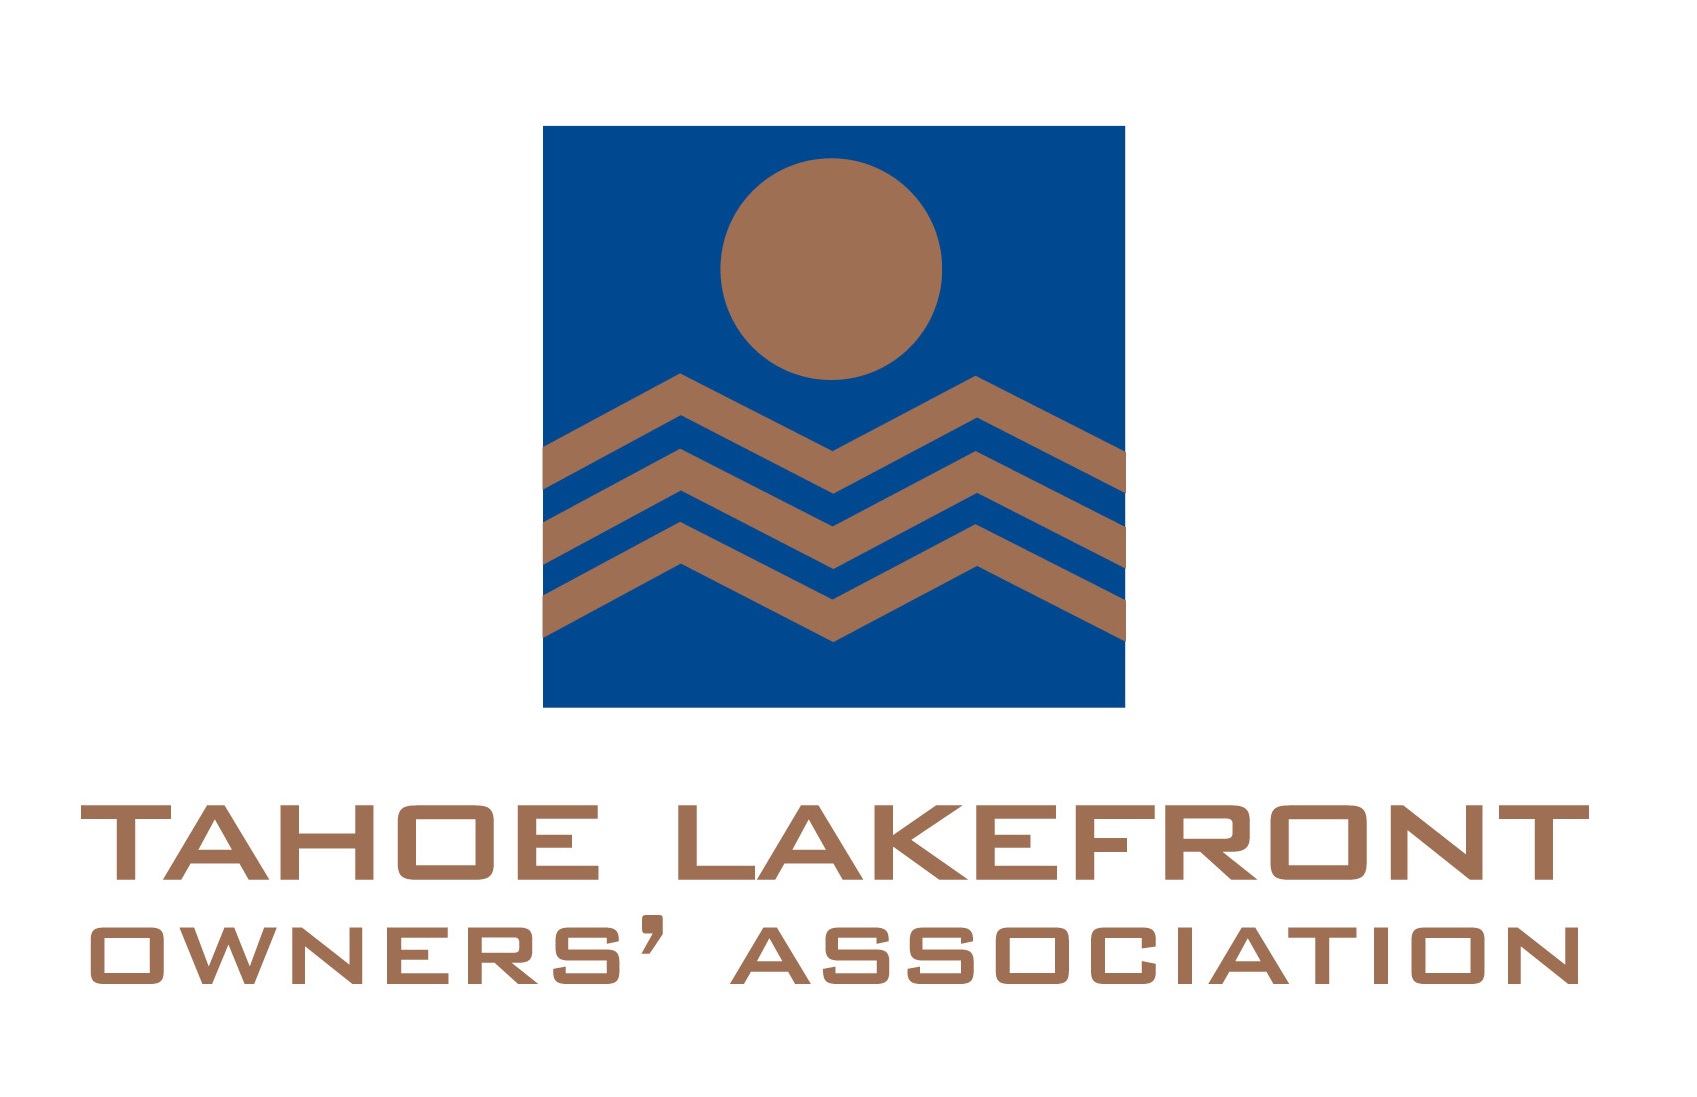 tahoe lakefront owners association